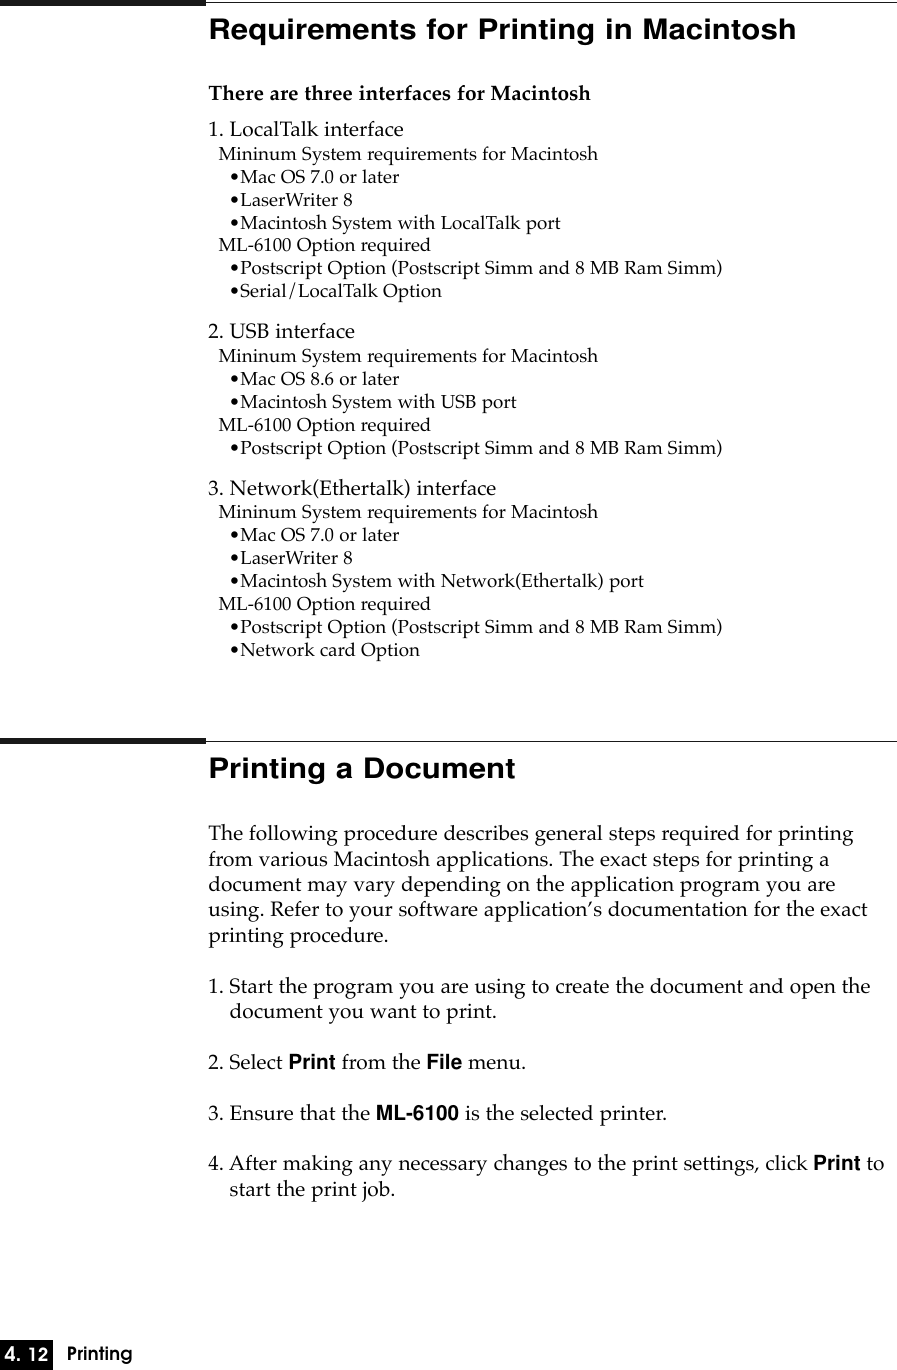 4. 12PrintingRequirements for Printing in MacintoshThere are three interfaces for Macintosh1. LocalTalk interfaceMininum System requirements for Macintosh¥Mac OS 7.0 or later¥LaserWriter 8¥Macintosh System with LocalTalk portML-6100 Option required¥Postscript Option (Postscript Simm and 8 MB Ram Simm)¥Serial/LocalTalk Option2. USB interfaceMininum System requirements for Macintosh¥Mac OS 8.6 or later¥Macintosh System with USB portML-6100 Option required¥Postscript Option (Postscript Simm and 8 MB Ram Simm)3. Network(Ethertalk) interfaceMininum System requirements for Macintosh¥Mac OS 7.0 or later¥LaserWriter 8¥Macintosh System with Network(Ethertalk) portML-6100 Option required¥Postscript Option (Postscript Simm and 8 MB Ram Simm)¥Network card OptionPrinting a DocumentThe following procedure describes general steps required for printingfrom various Macintosh applications. The exact steps for printing a document may vary depending on the application program you areusing. Refer to your software applicationÕs documentation for the exactprinting procedure.1. Start the program you are using to create the document and open thedocument you want to print.2. Select Print from the File menu.3. Ensure that the ML-6100 is the selected printer.4. After making any necessary changes to the print settings, click Print tostart the print job.